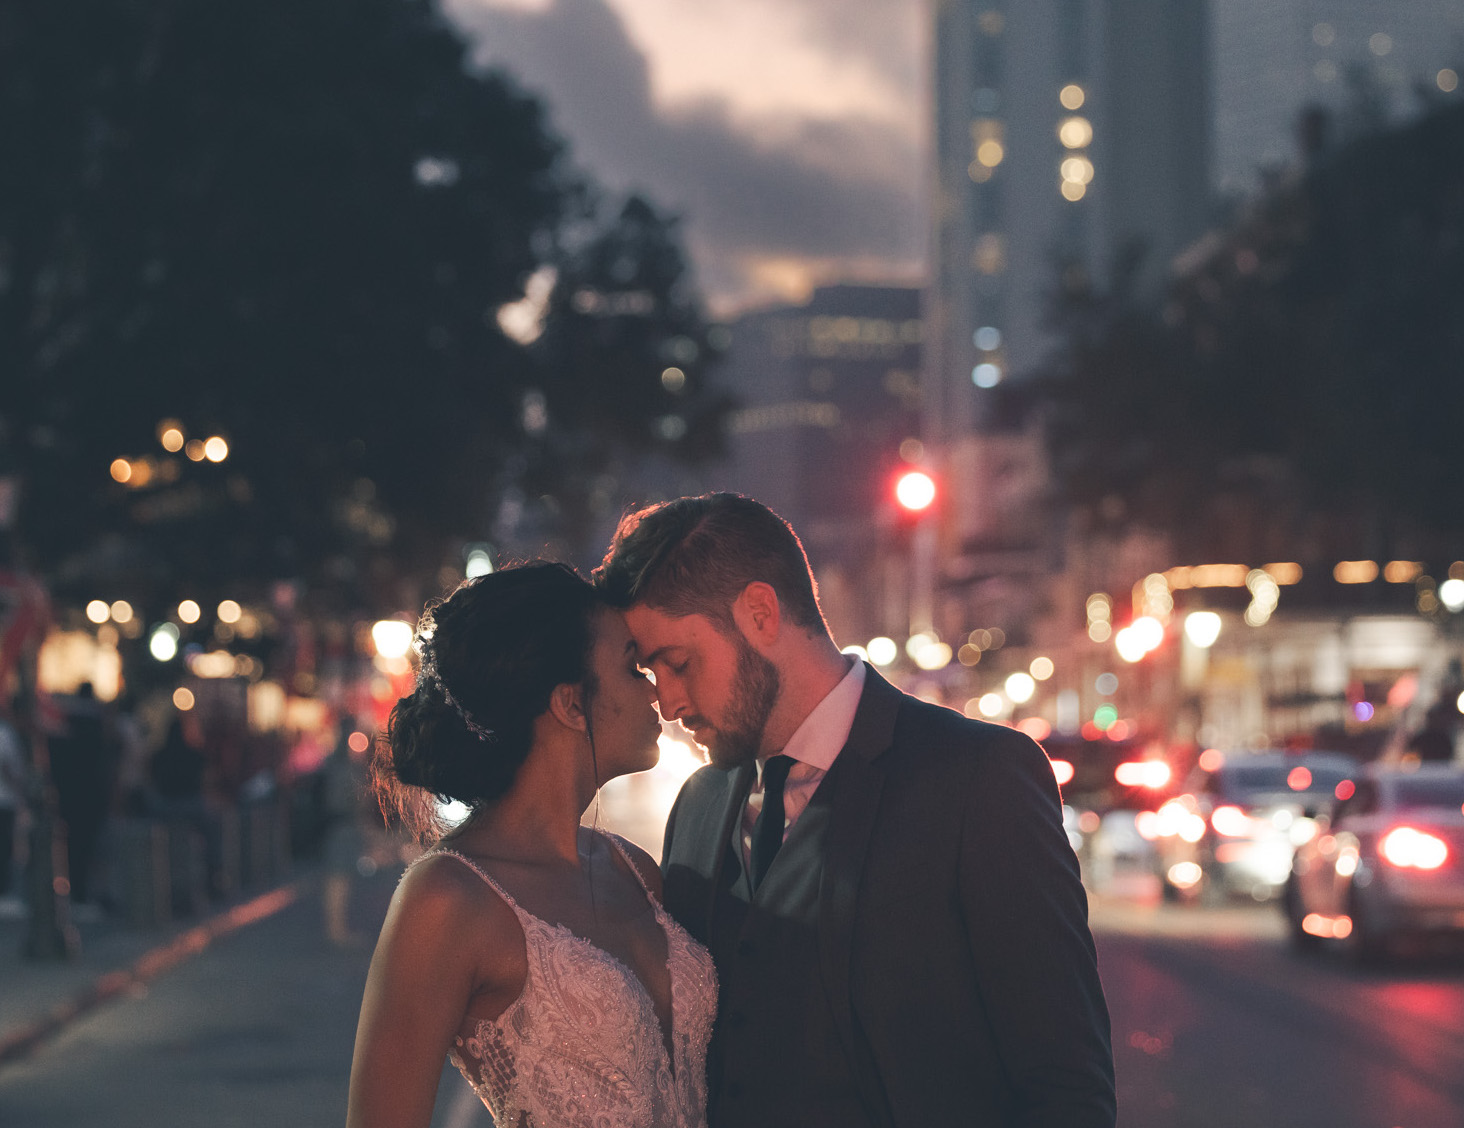 A bride and groom embrace in the street during their wedding day in New Orleans.